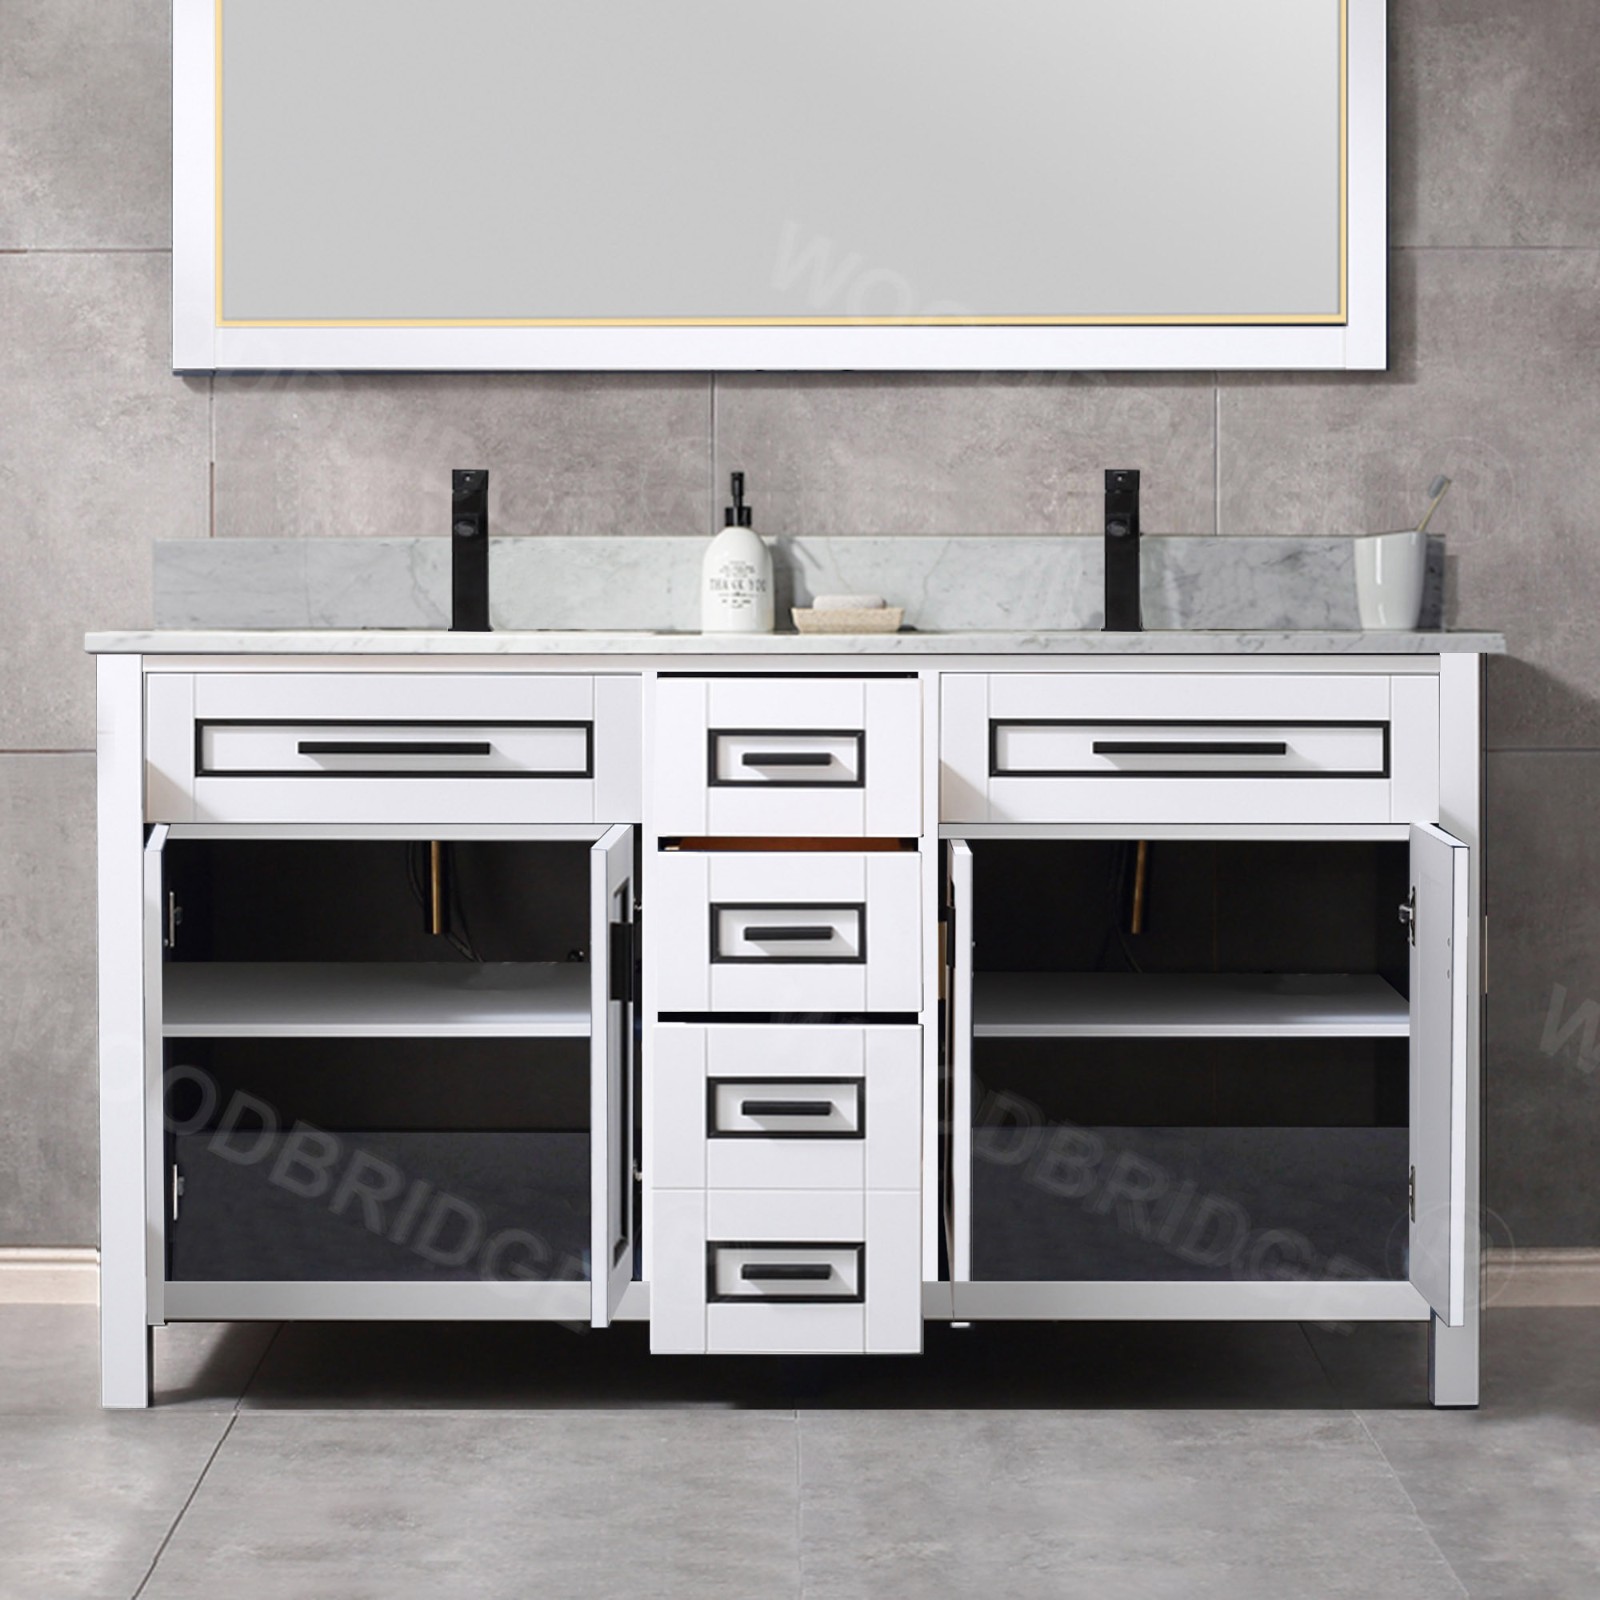  WOODBRIDGE Milan  61” Floor Mounted Single Basin Vanity Set with Solid Wood Cabinet in White, and Carrara White Marble Vanity Top with Pre-installed Undermount Rectangle Bathroom Sink in White, Pre-Drilled Single Faucet Hole_4621